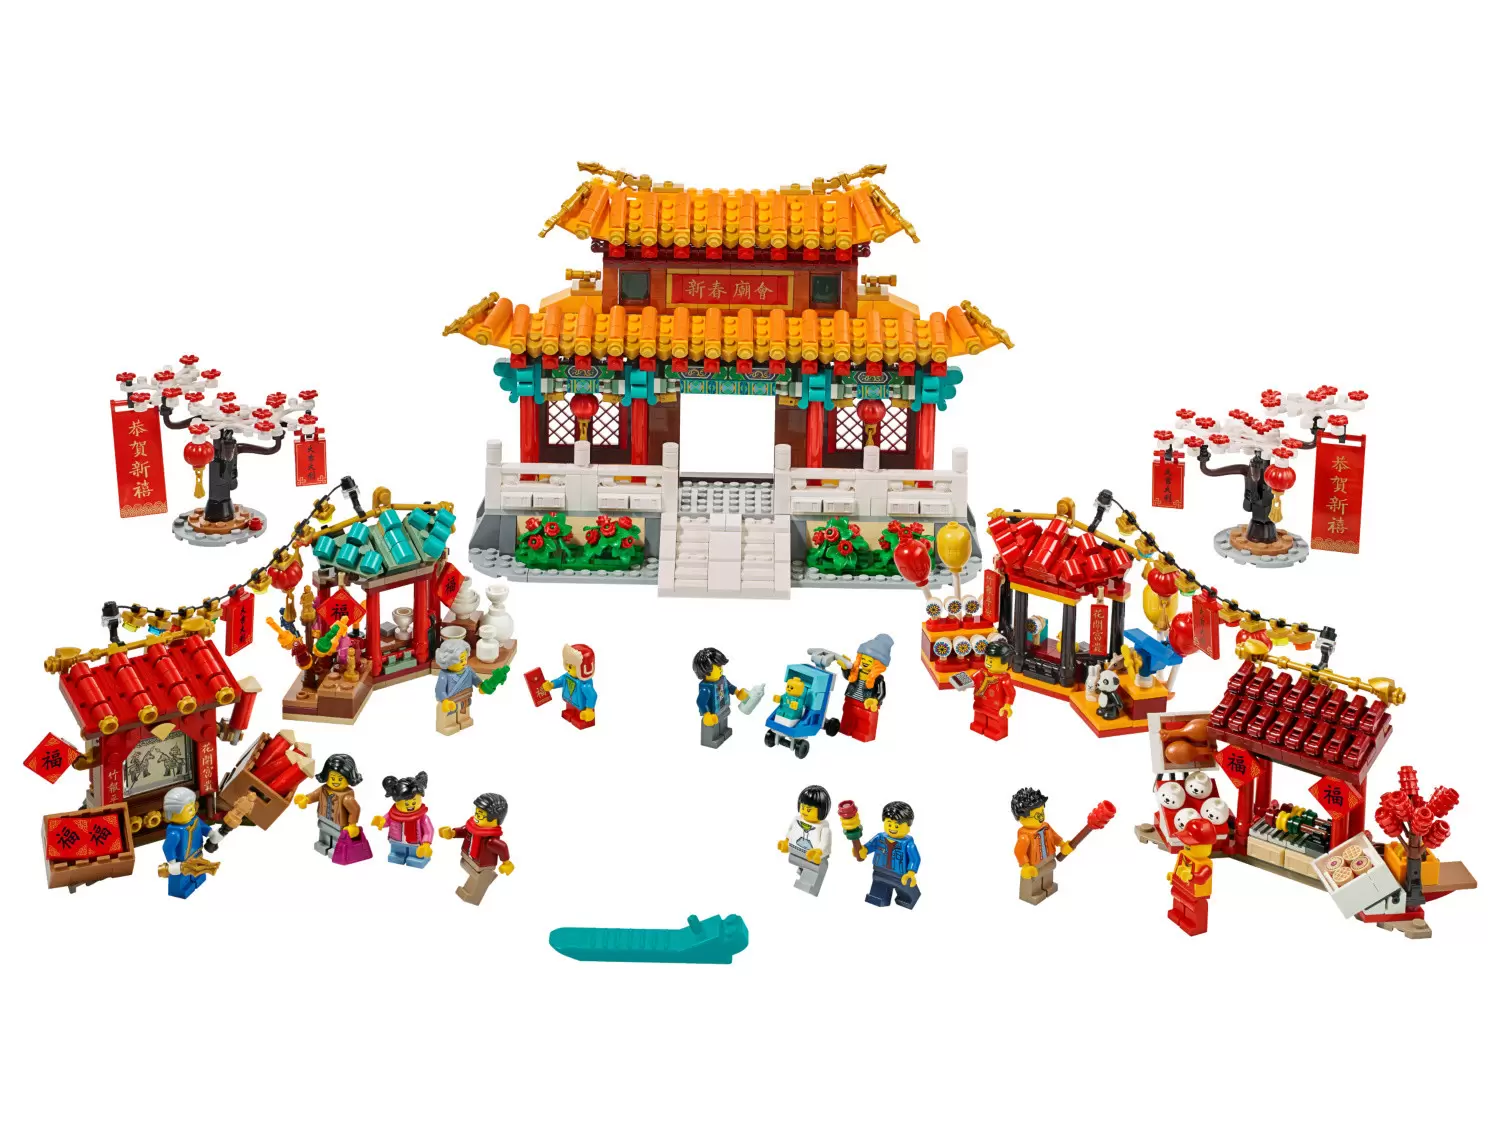 Lego 80108 - Traditions du nouvel an chinois